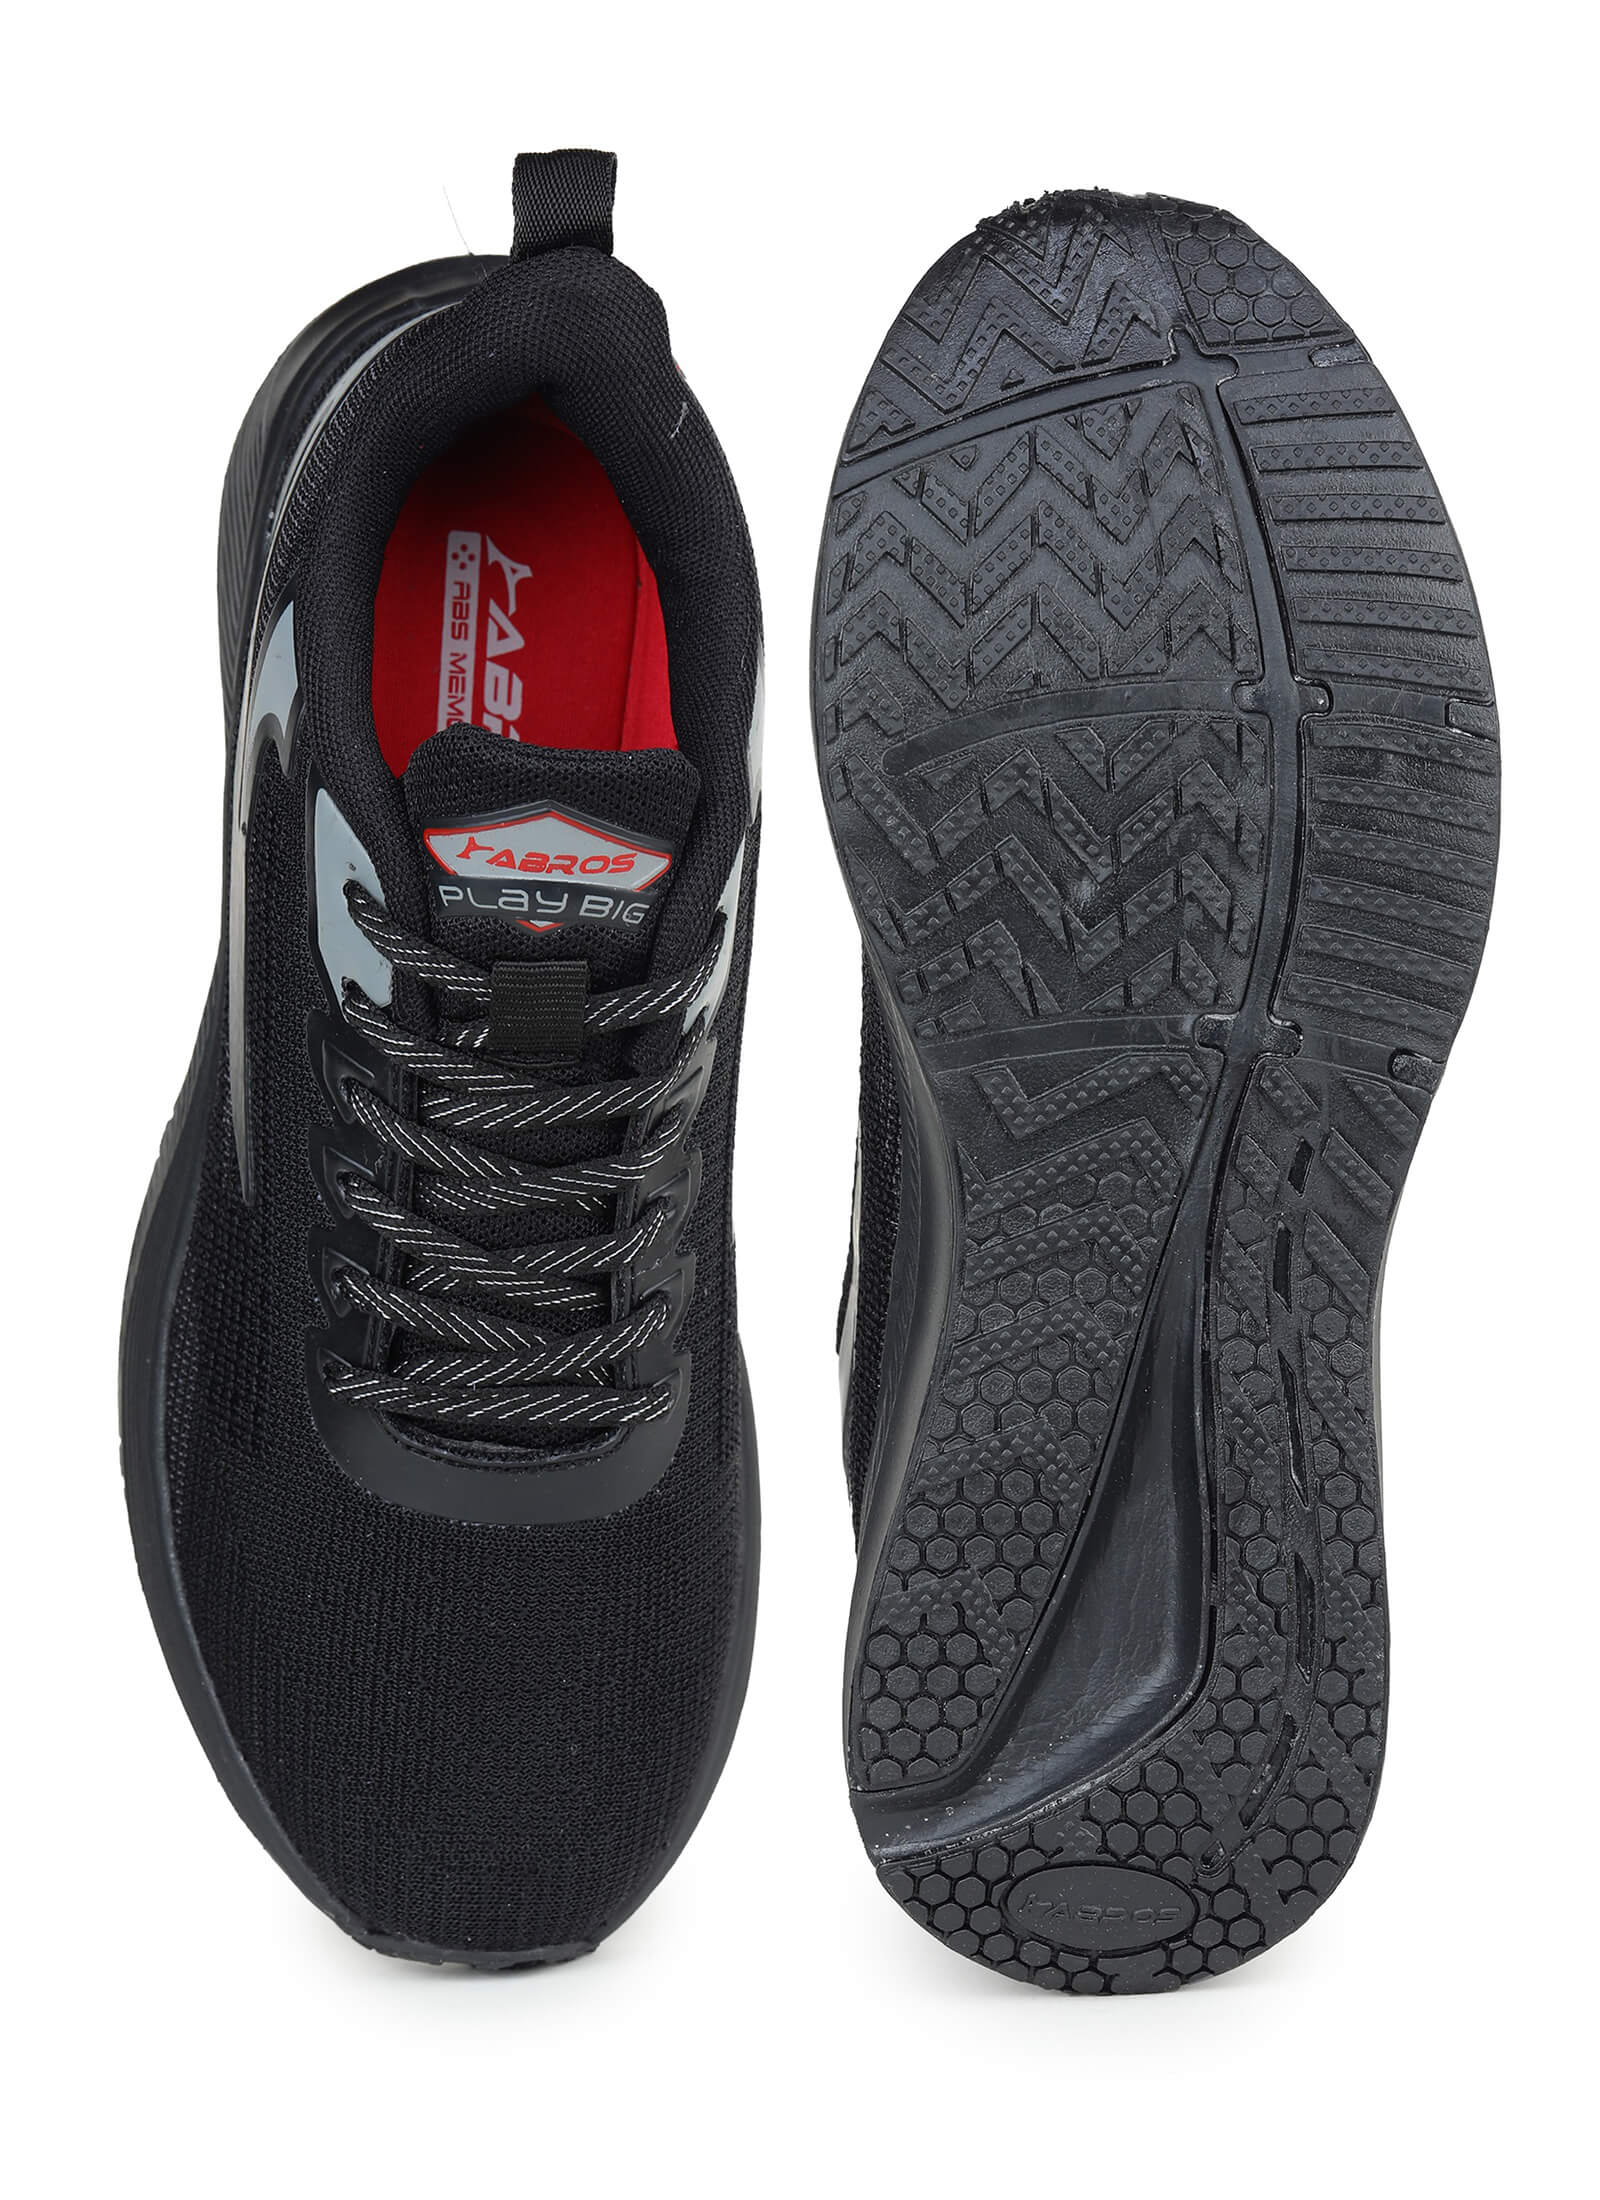 Clay Sports Shoes For Men